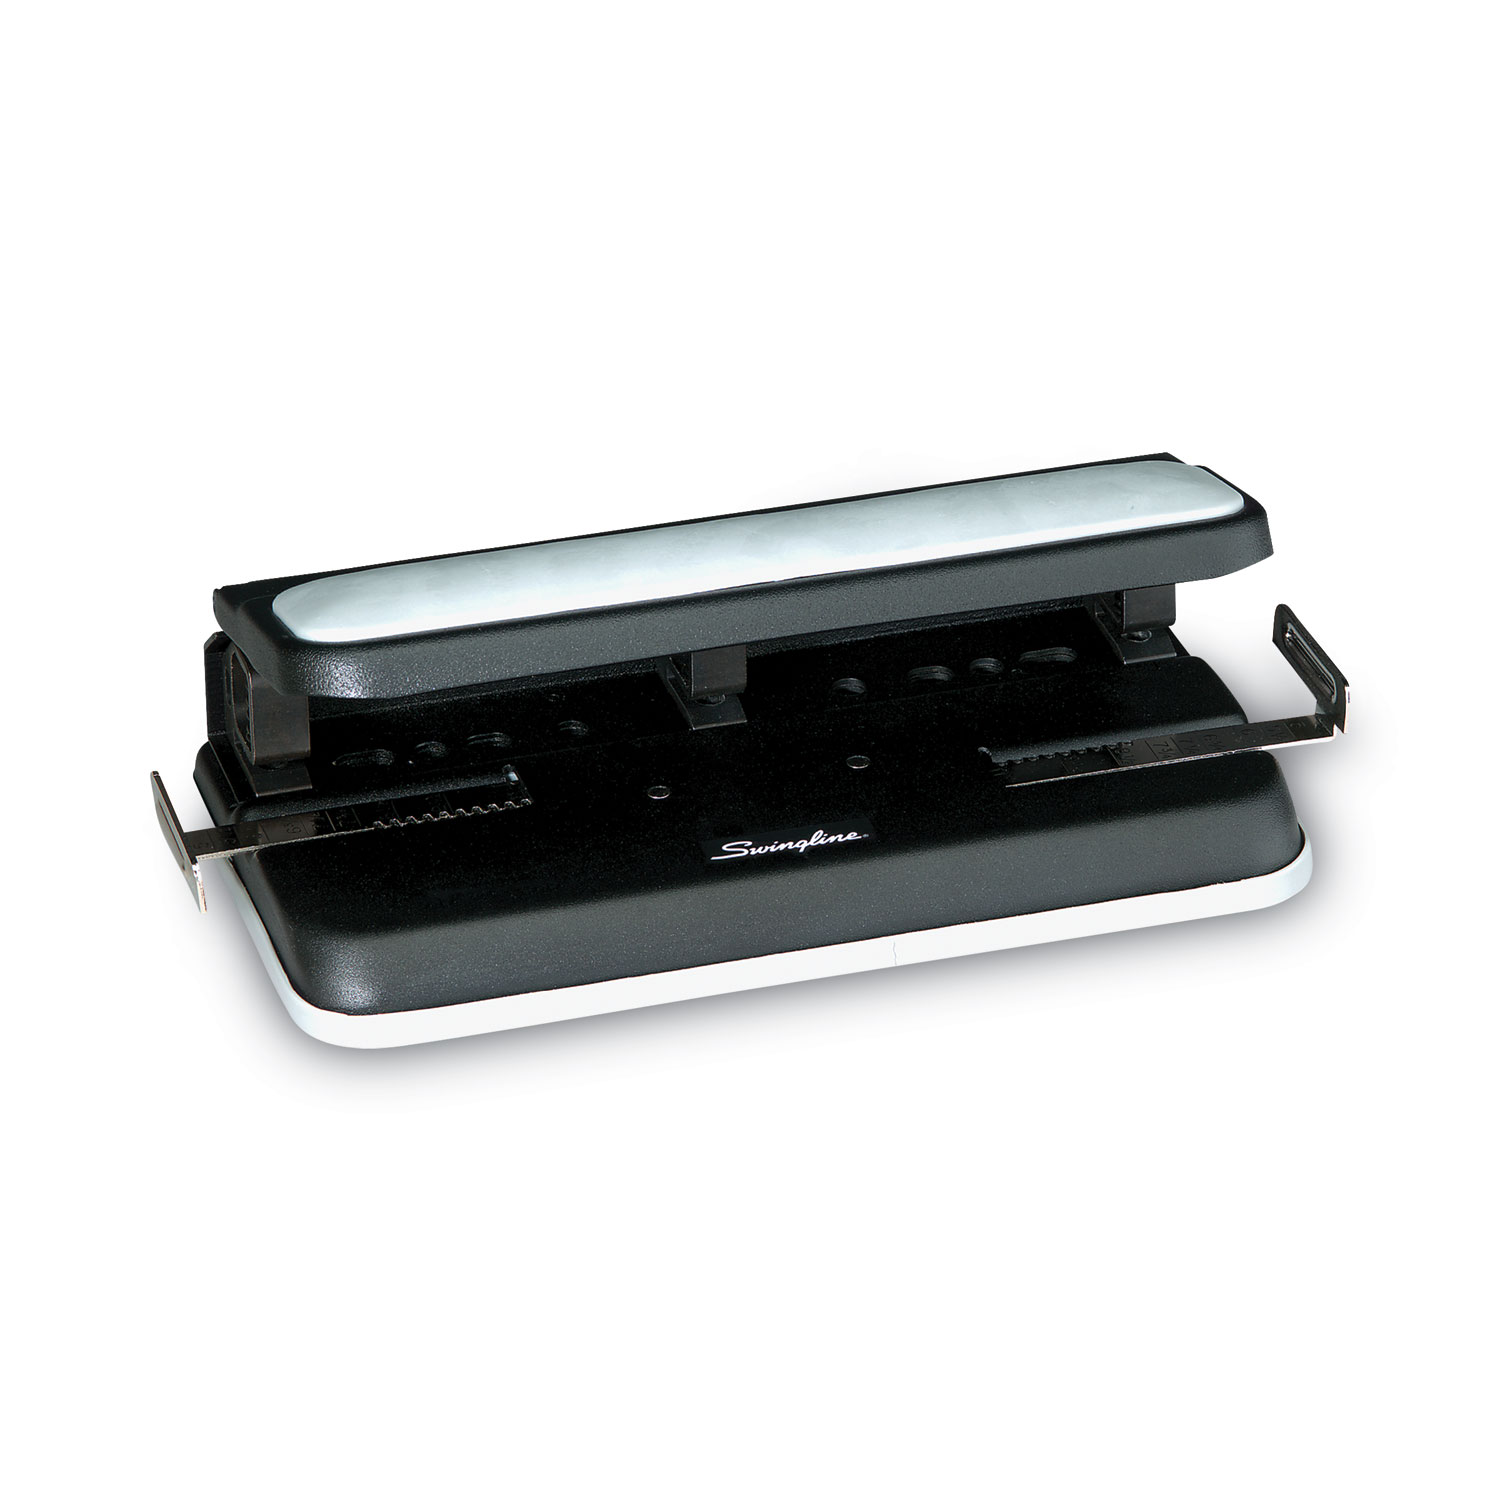 50-Sheet Deluxe Two-Hole Punch, 1/4 Holes, Gray/Blue